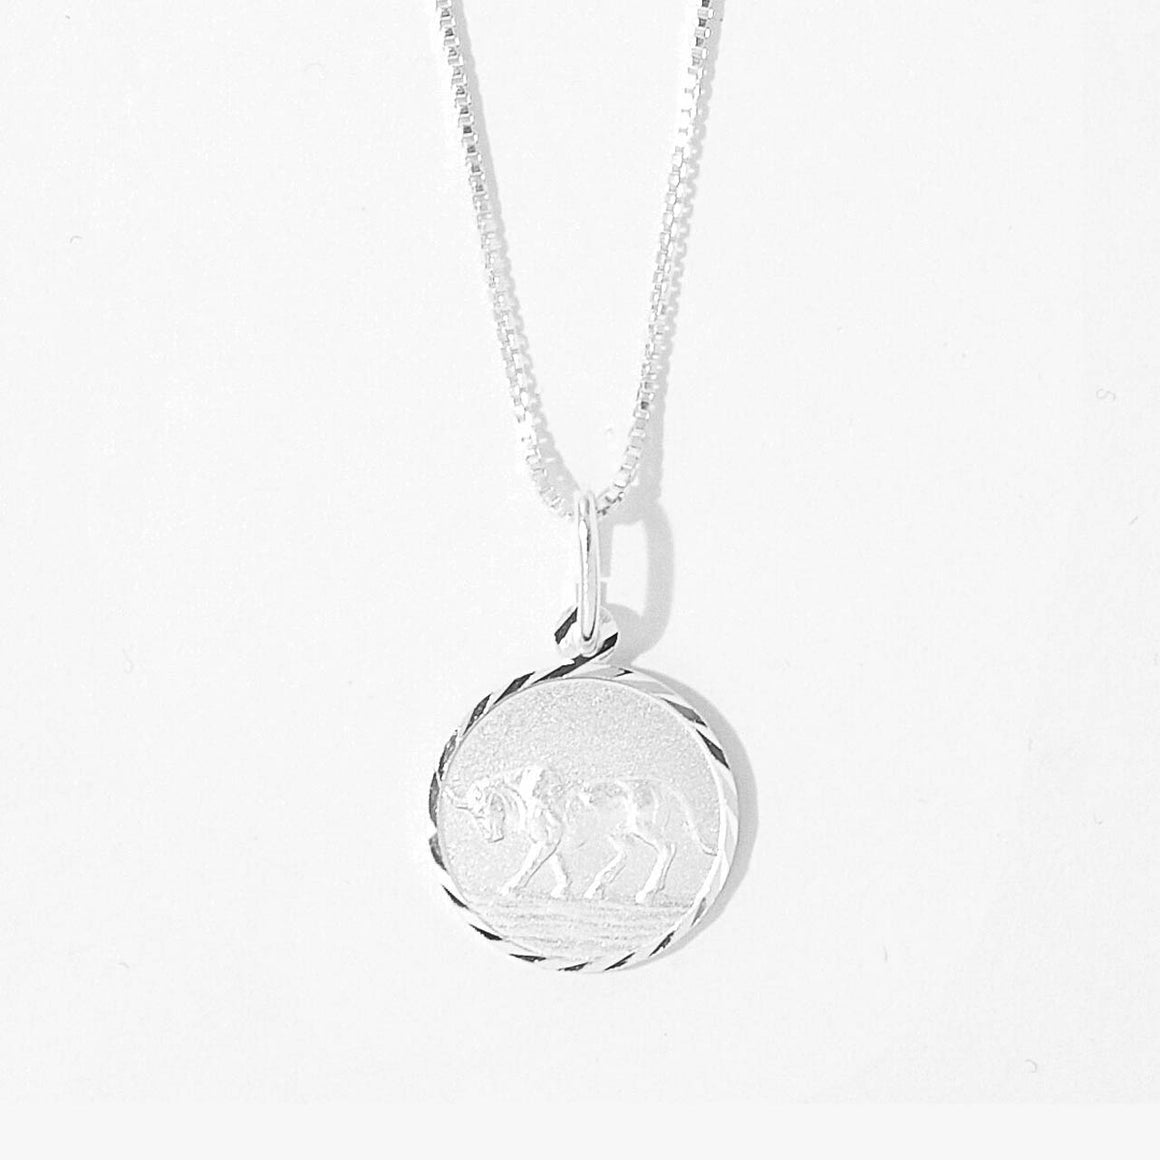 Taurus Astrological Pendant with 20" Chain